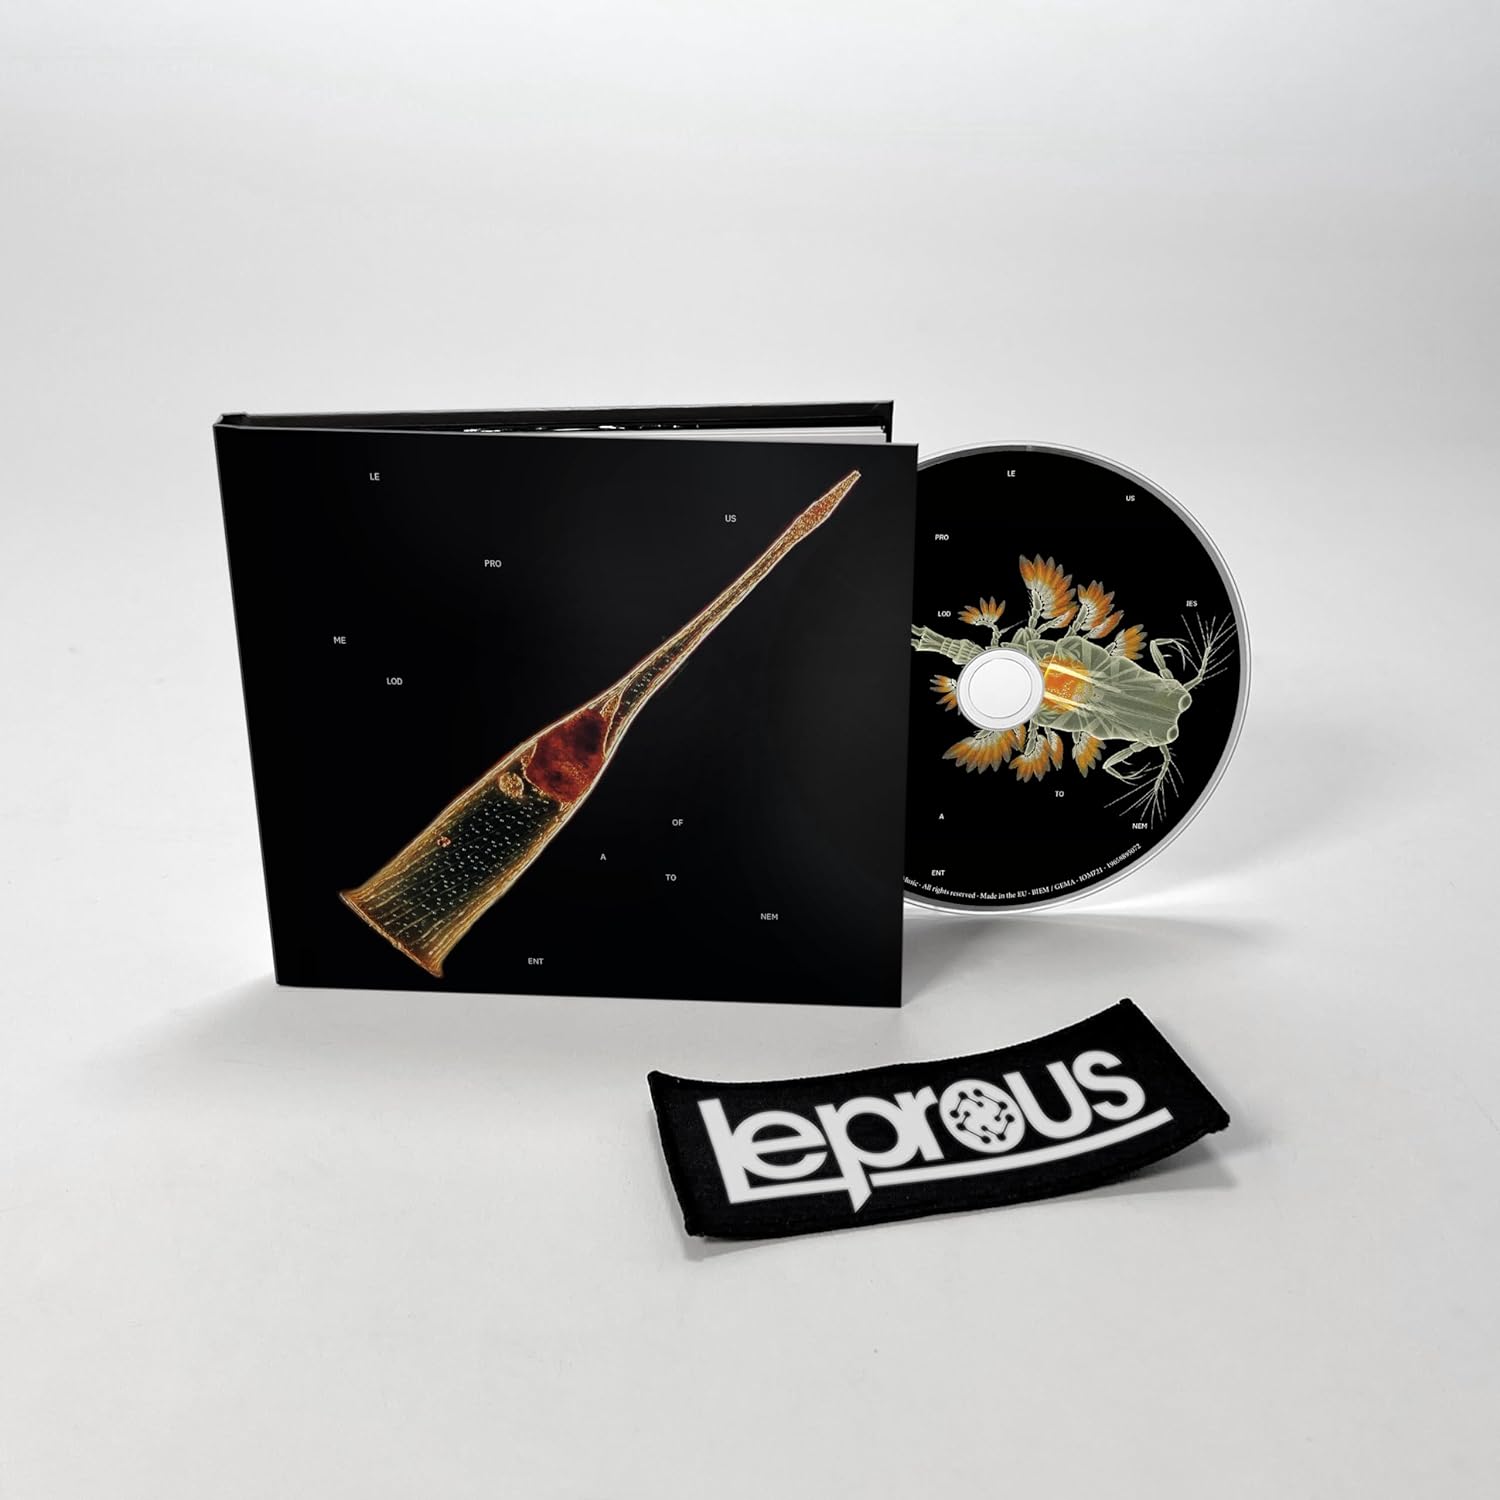 Leprous "Melodies Of Atonement" Casebound Book CD & Patch - PRE-ORDER